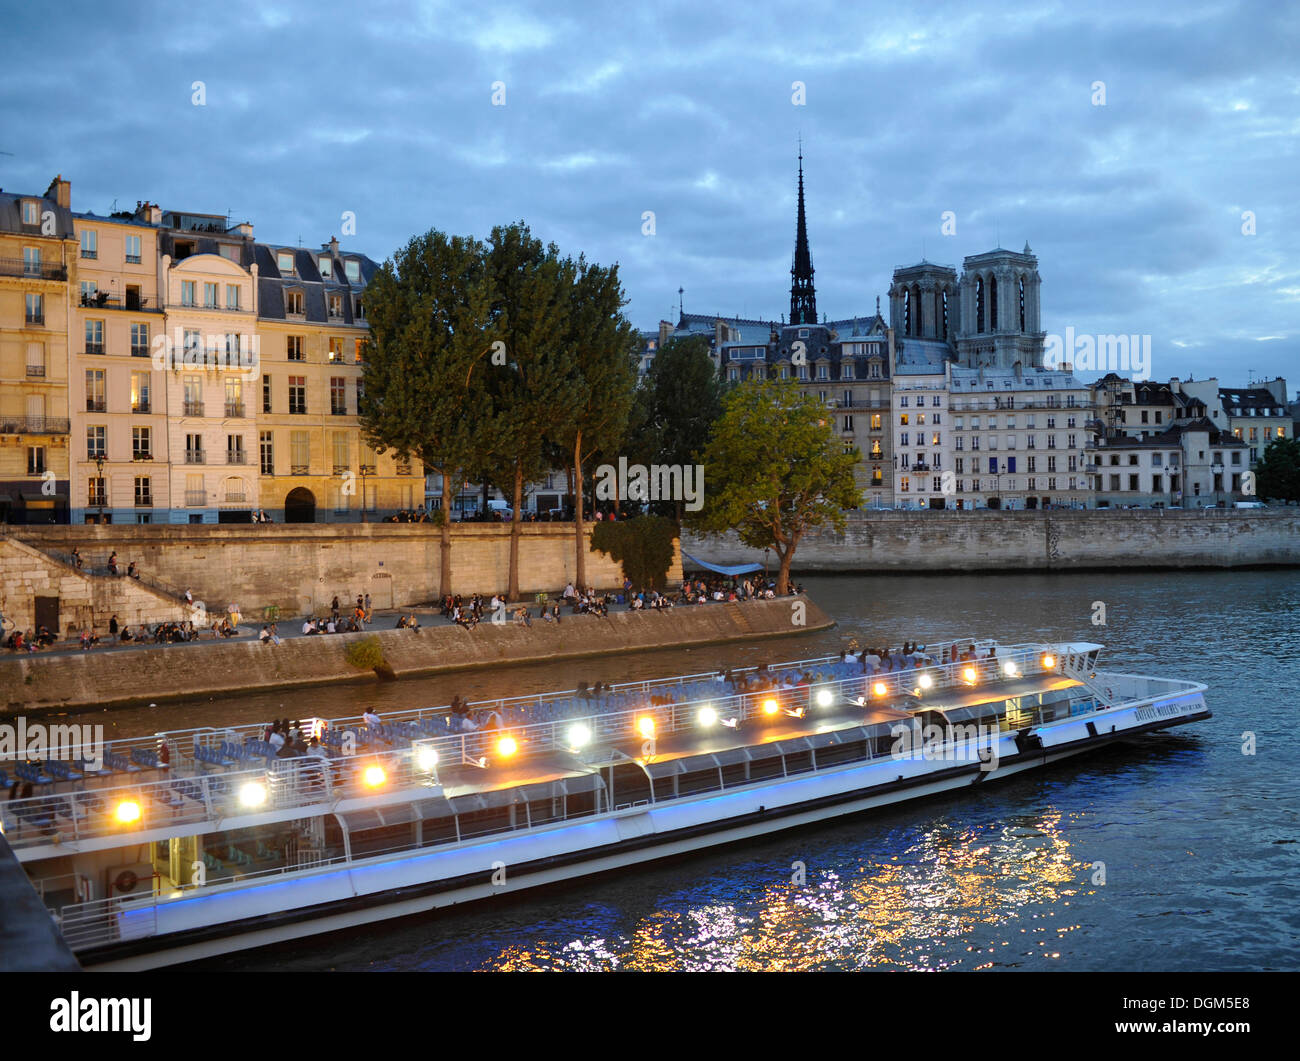 Bateaux Mouches on the Seine, excursion boat with spotlights, Notre Dame de Paris or Notre Dame Cathedral at back Stock Photo